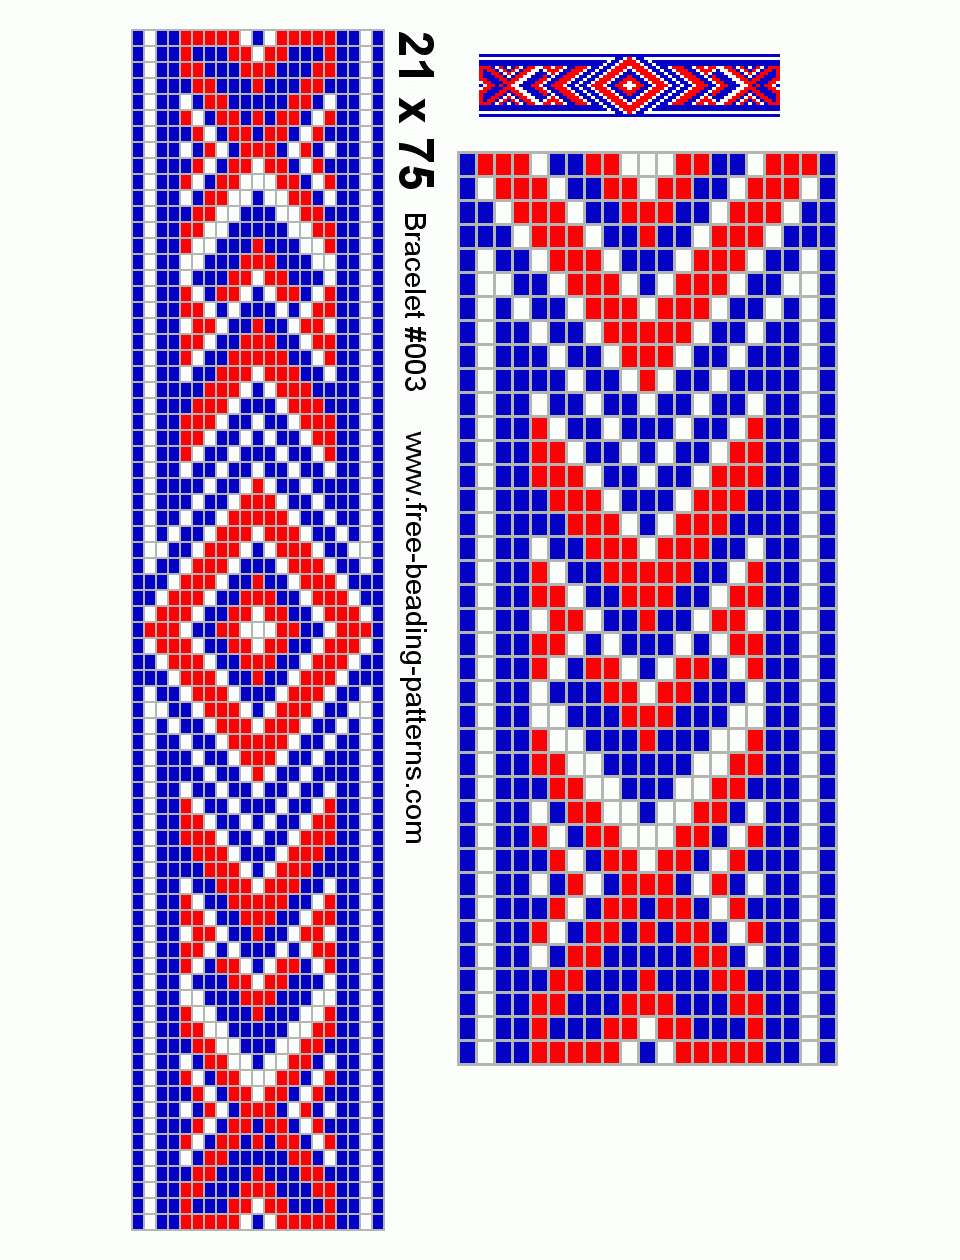 Designer Downloads Free Printable Seed Bead Graph Paper Artbeads 